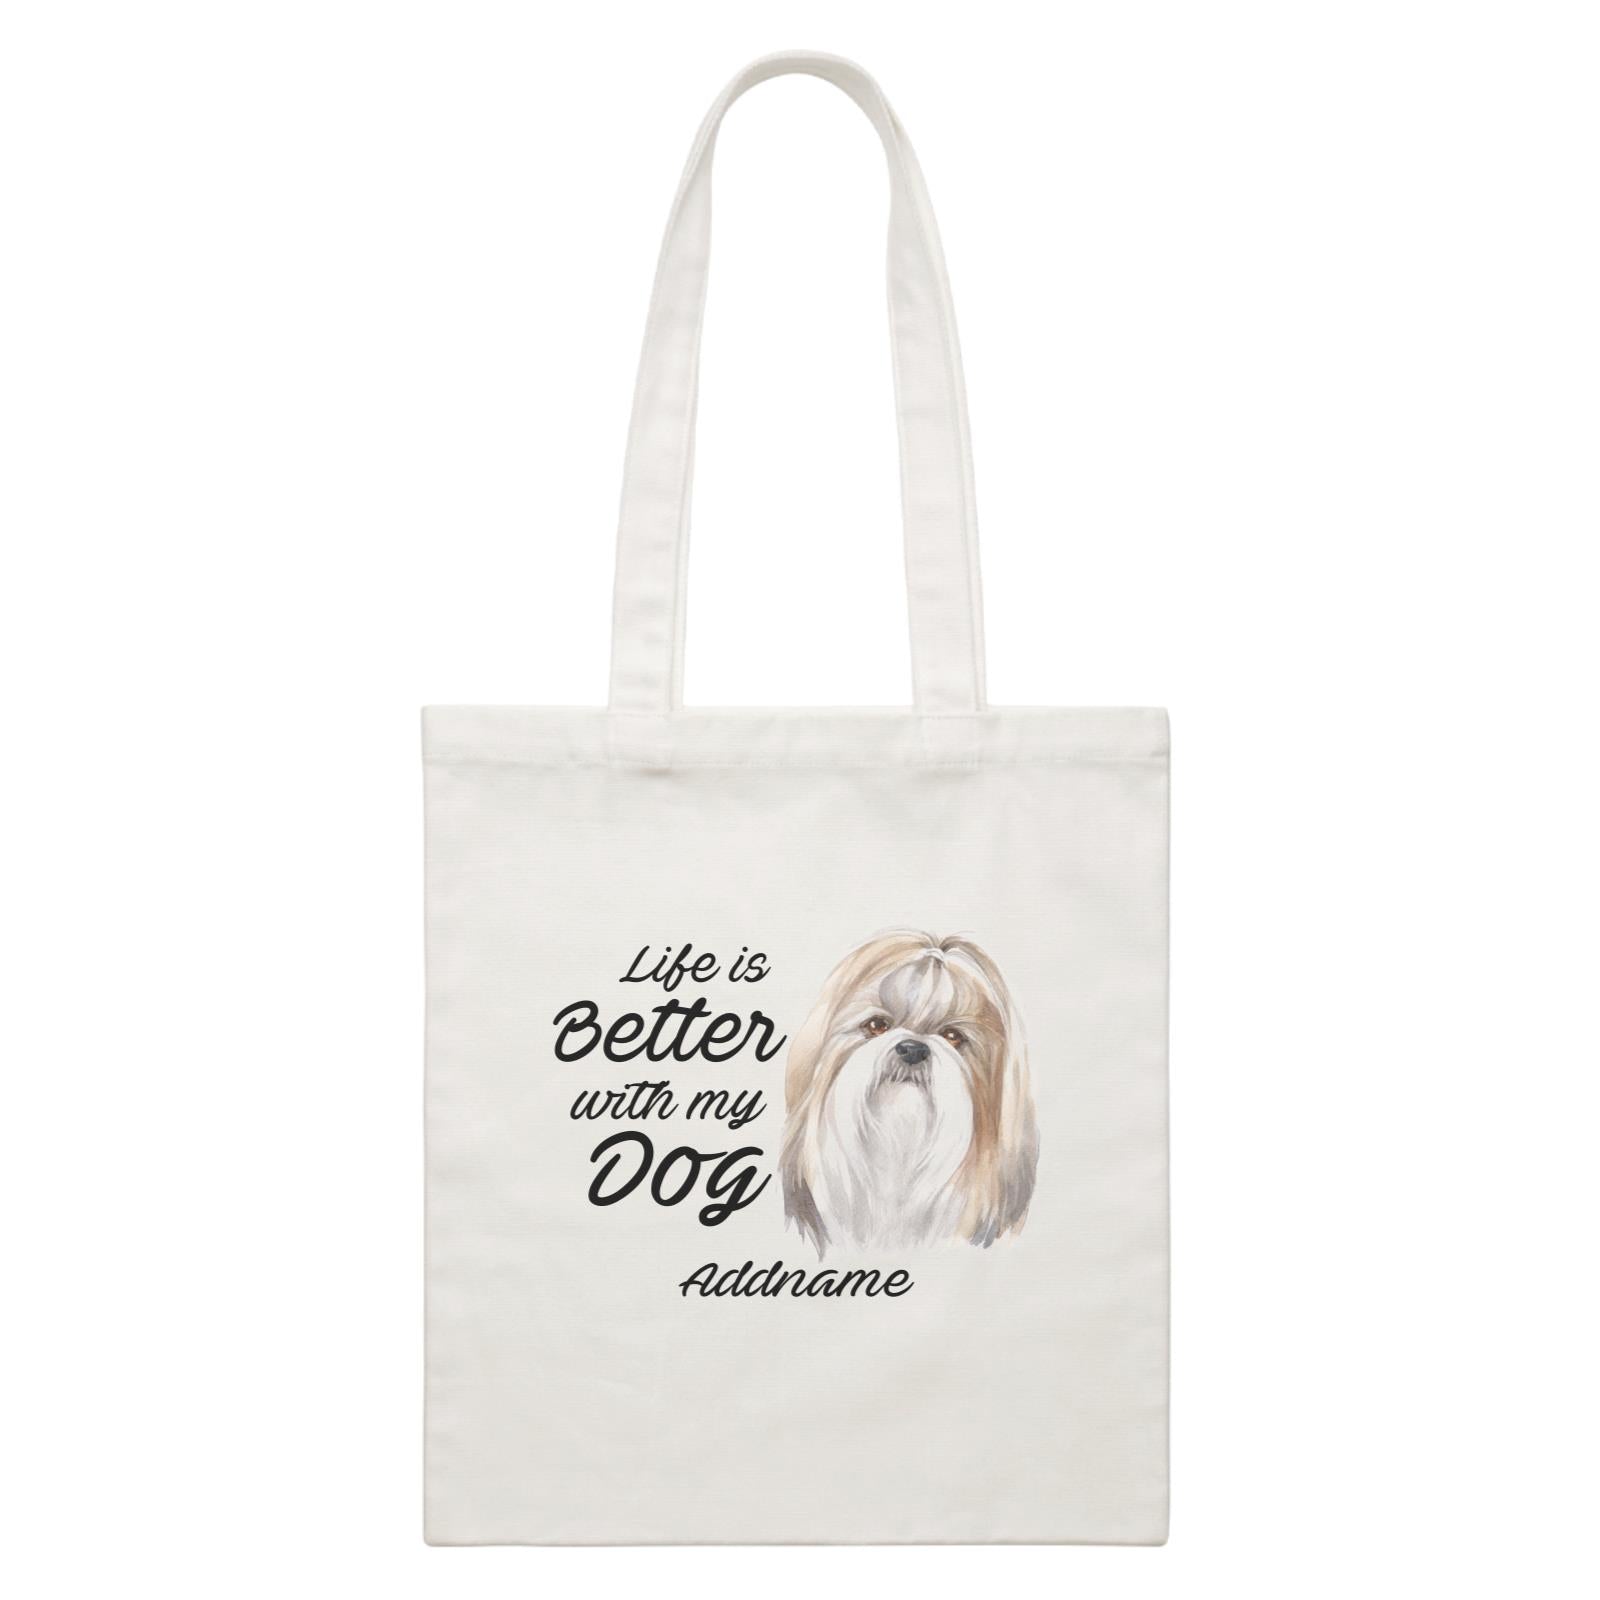 Watercolor Life is Better With My Dog Shih Tzu Addname White Canvas Bag